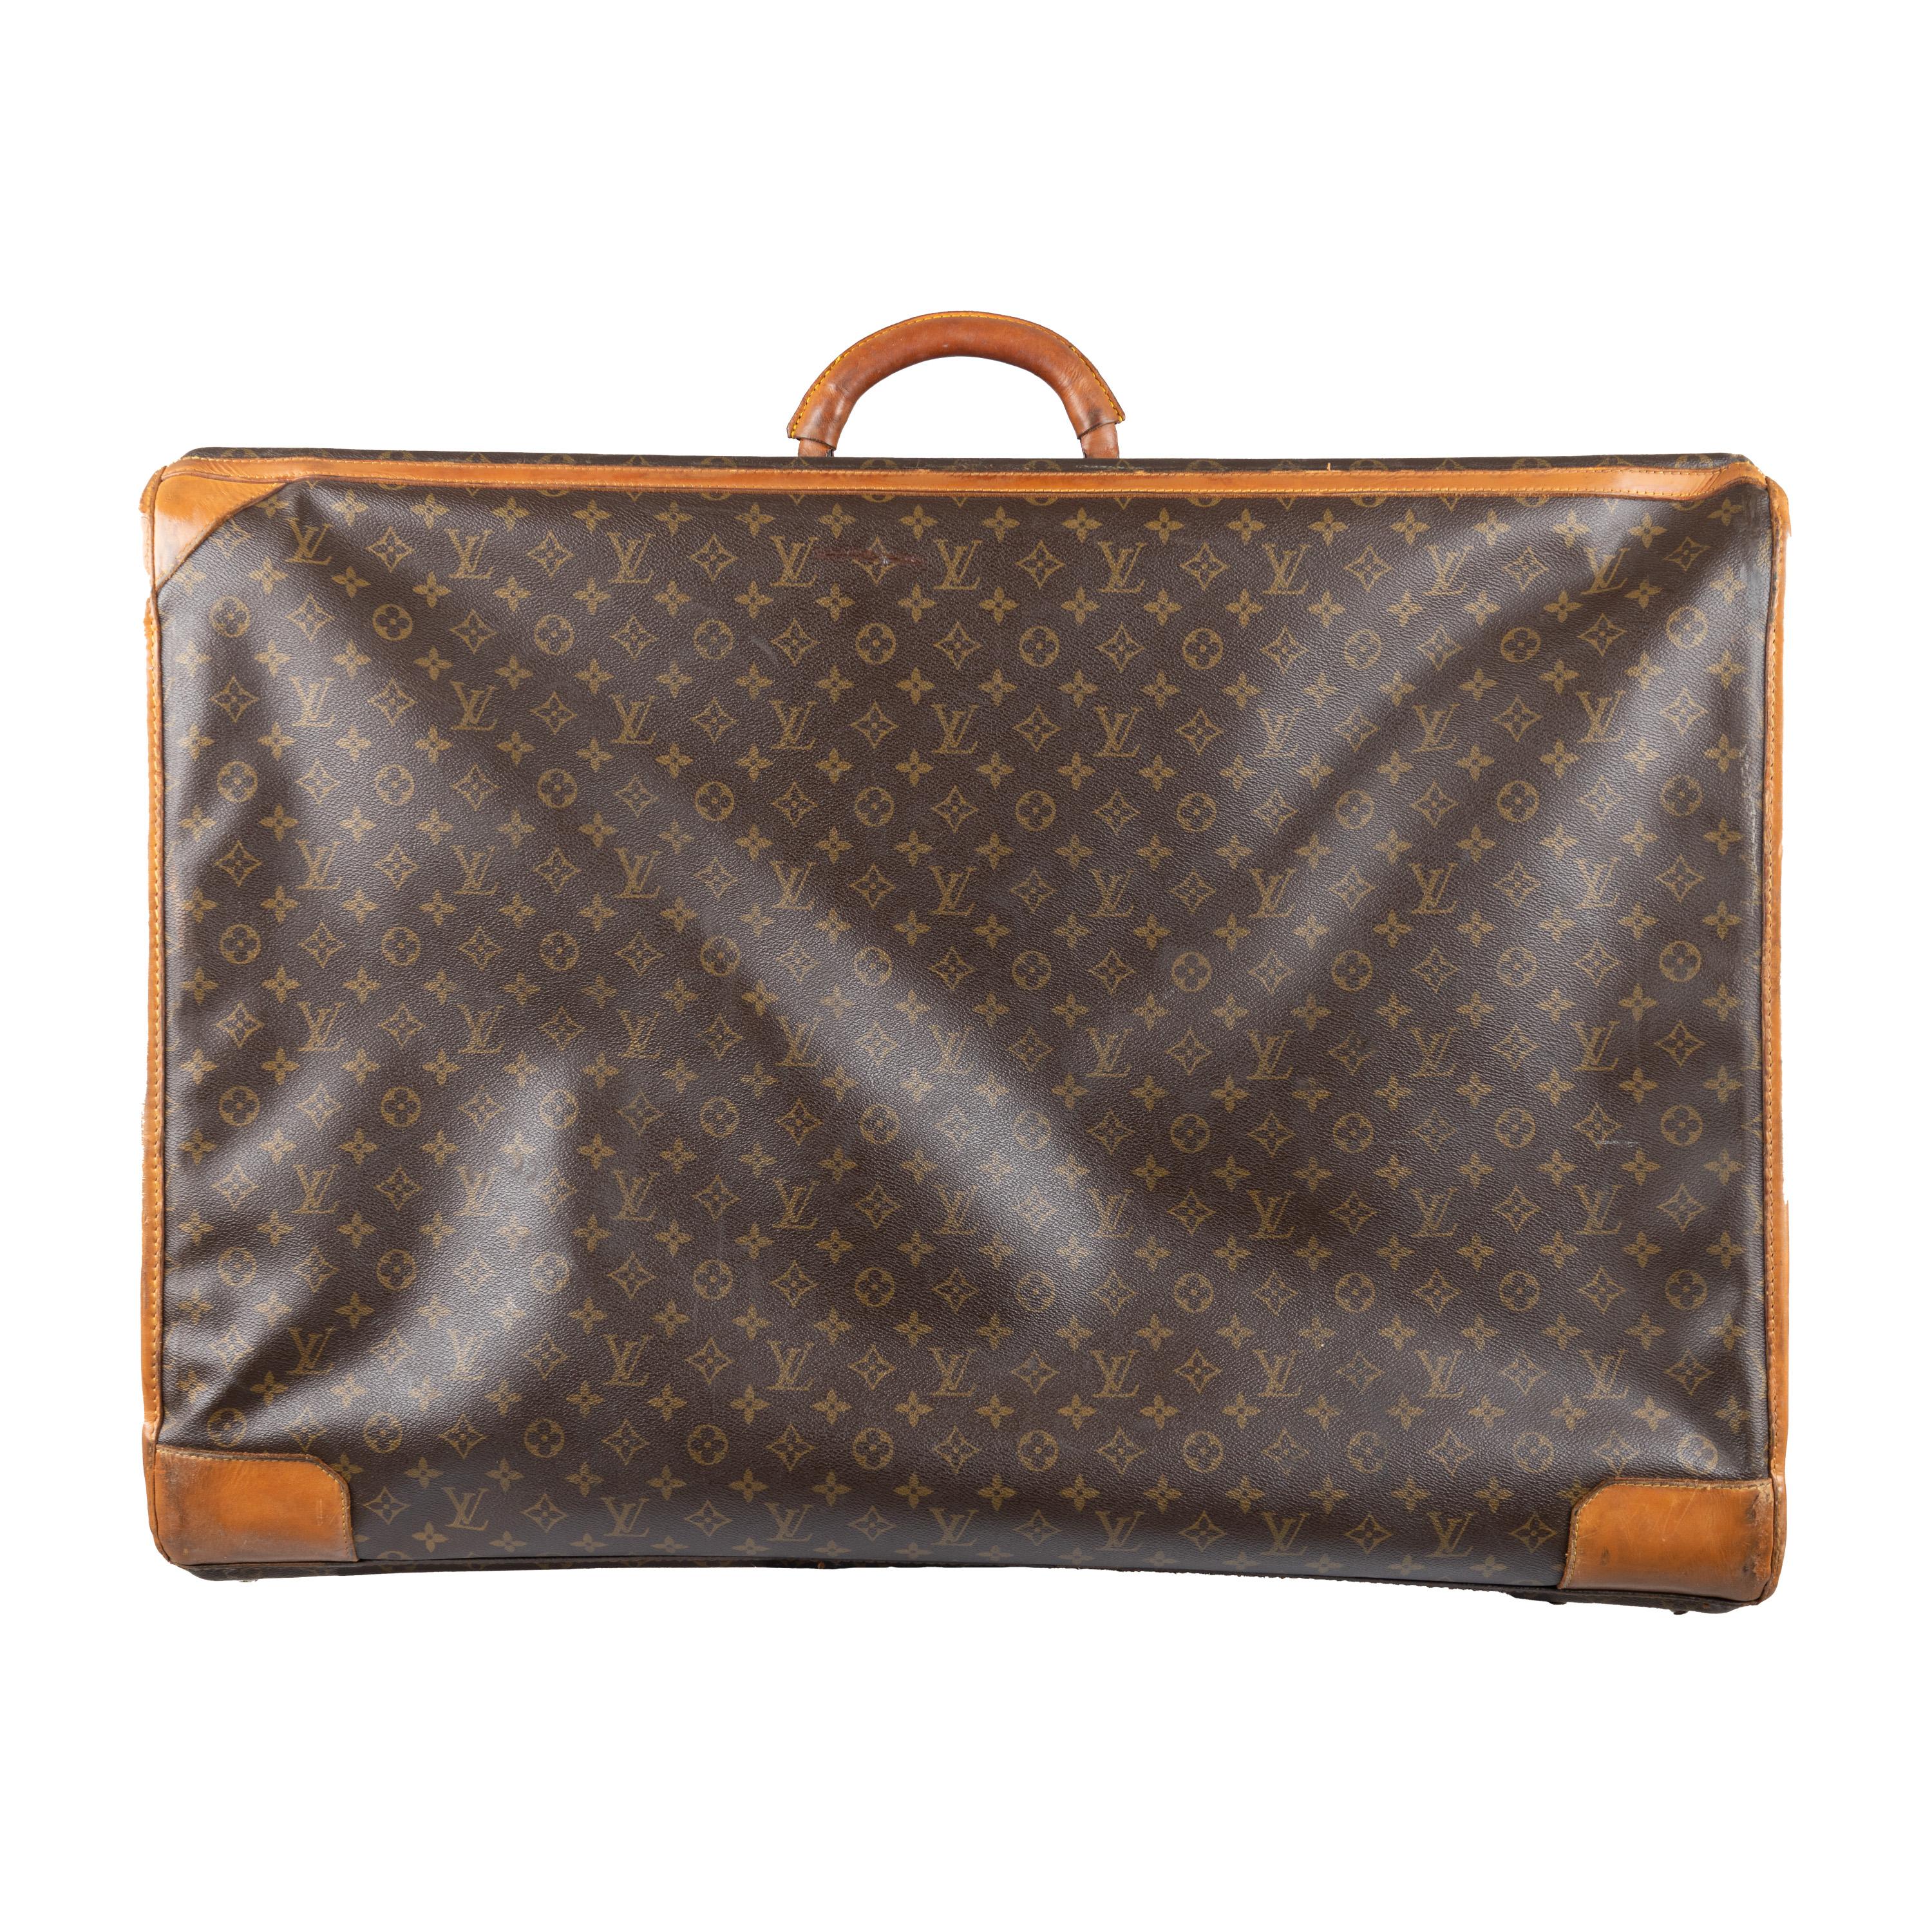 Crafted from Louis Vuitton's signature coated canvas, the bag features a leather-reinforced top handle and brass hardware with a numeral lock, plus a spacious interior with side pockets and straps. 

Remarks: There are many signs of wear.